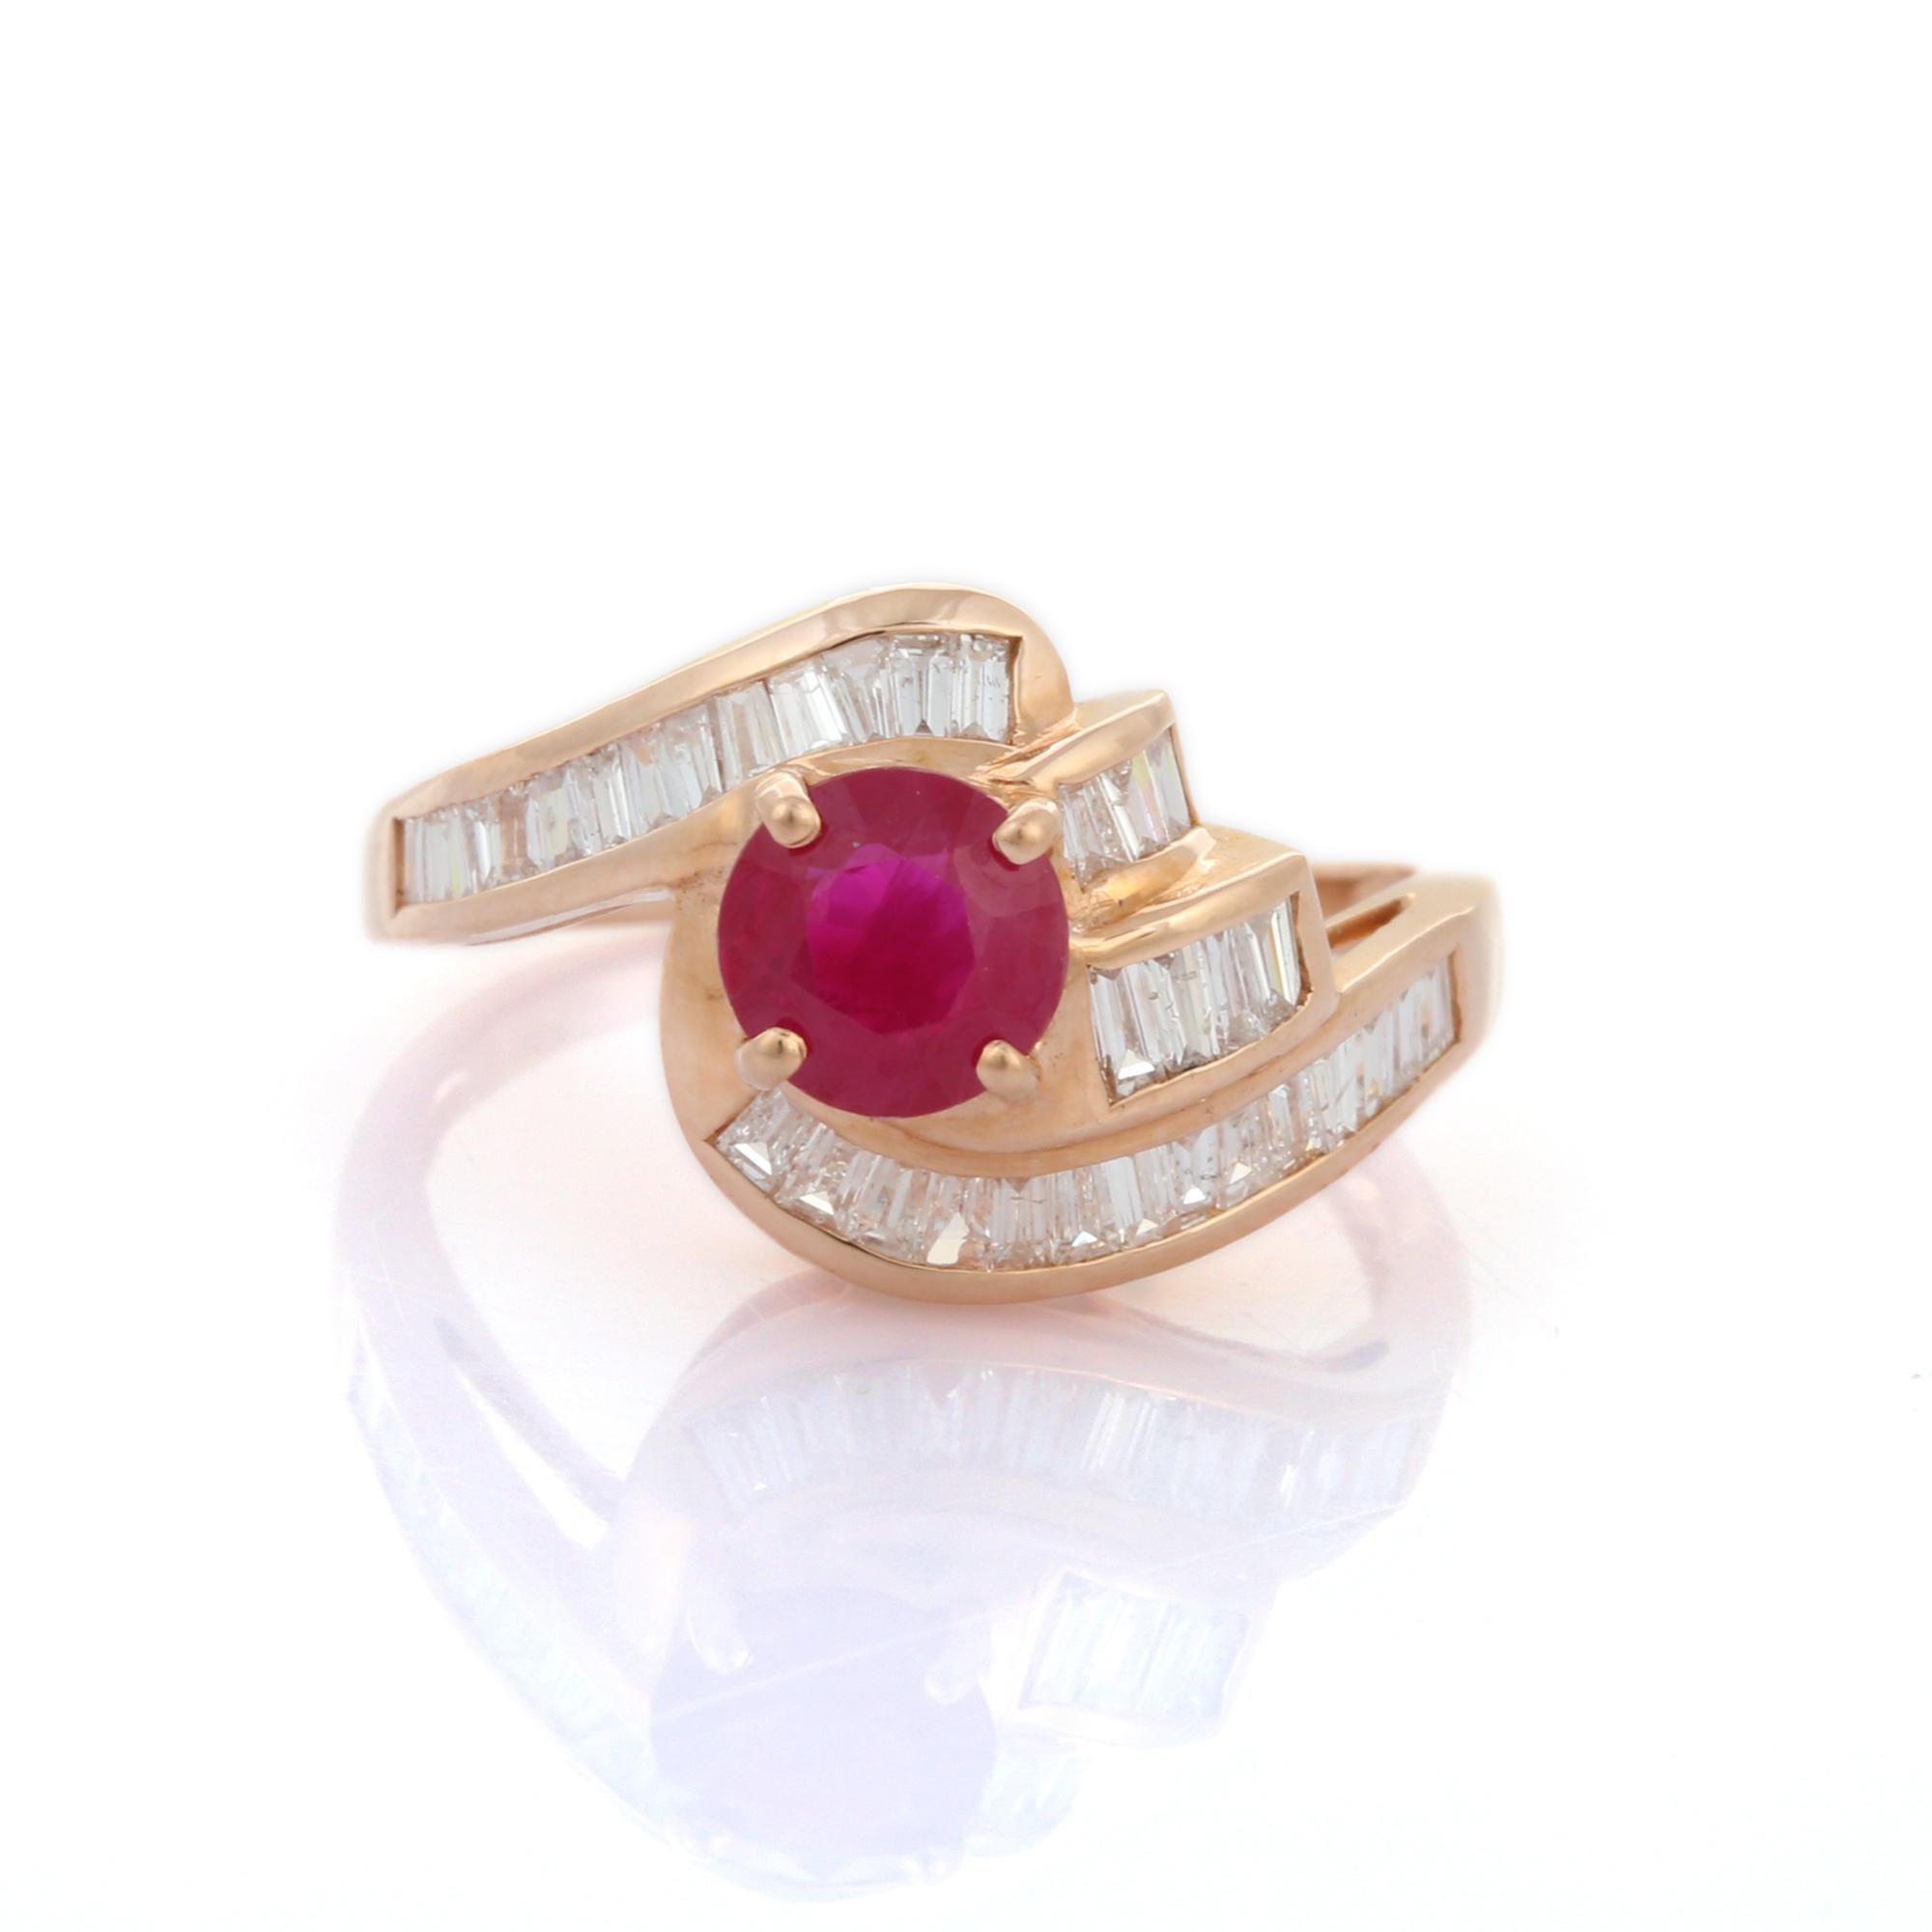 For Sale:  14K Rose Gold Baguette Cut Diamond and Ruby Ring 8